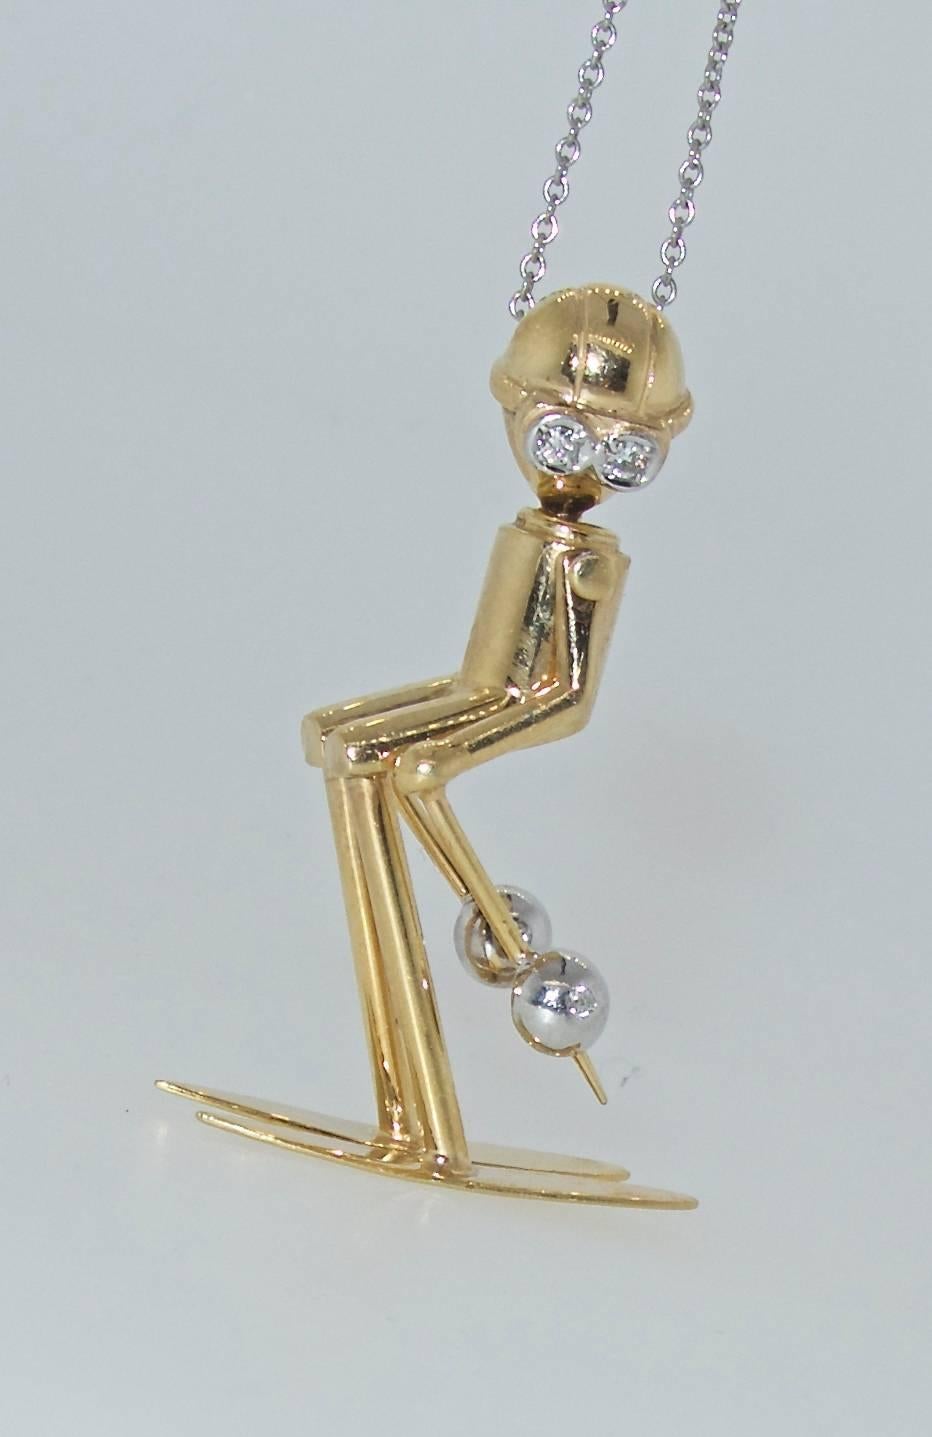 Brilliant Cut Skier Pendant in Gold with Diamond Accents